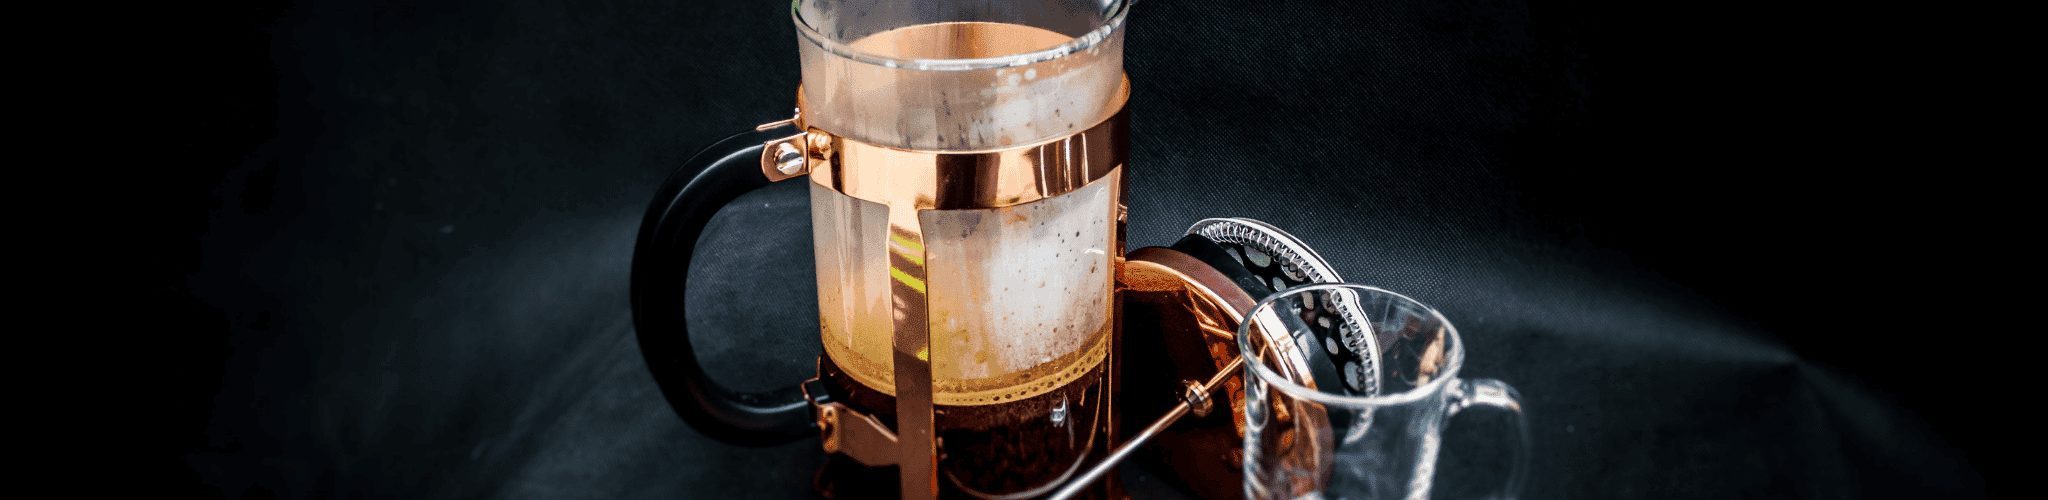 best French coffee maker